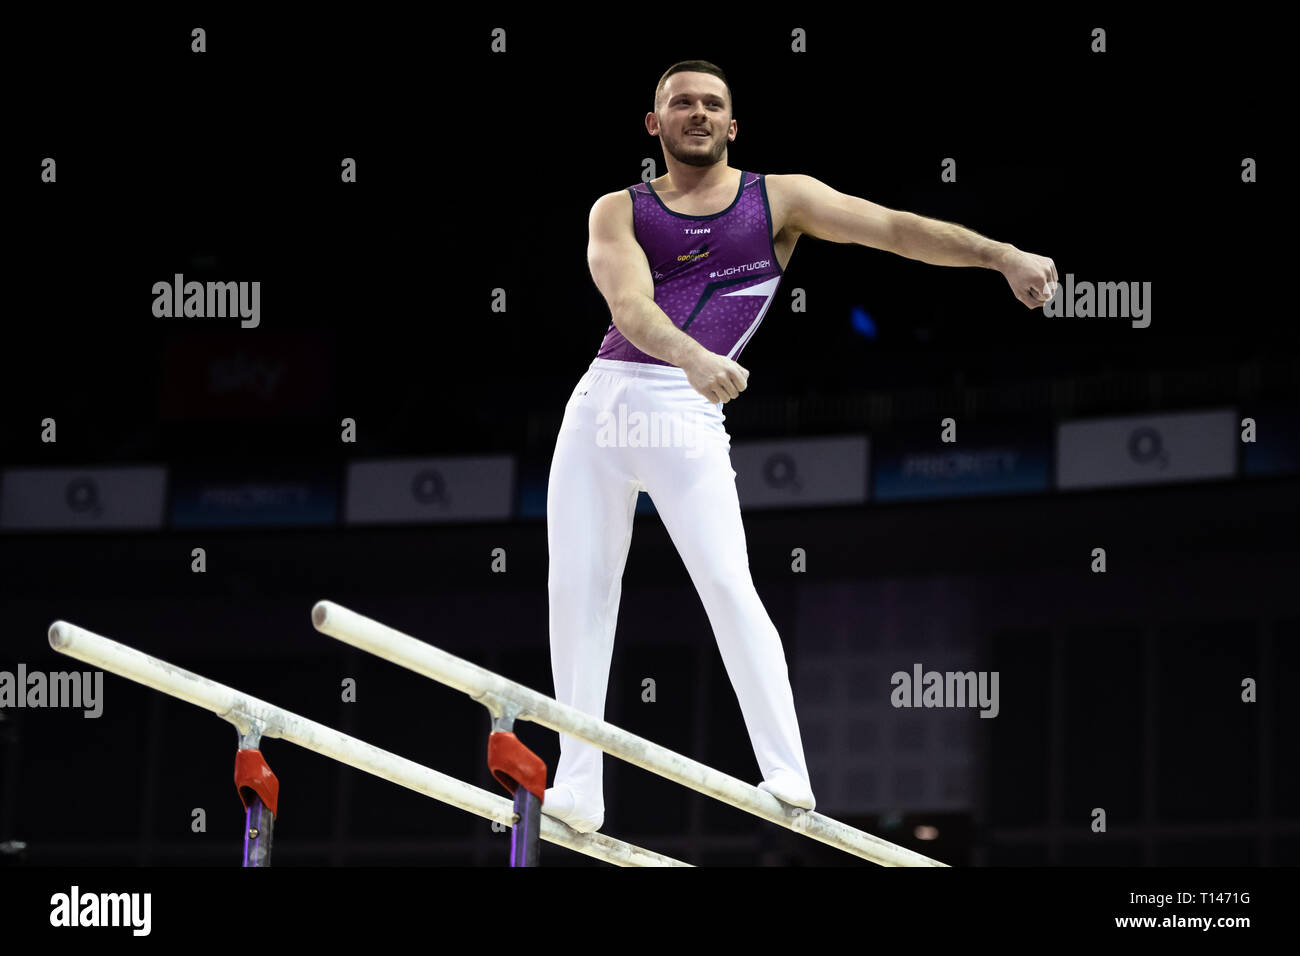 London, UK. 23rd March, 2019. Dom Cunningham performs on Parallel Bars during the Matchroom Multisport presents the 2019 Superstars of Gymnastics at The O2 Arena on Saturday, 23 March 2019. LONDON ENGLAND. Credit: Taka G Wu/Alamy News Stock Photo